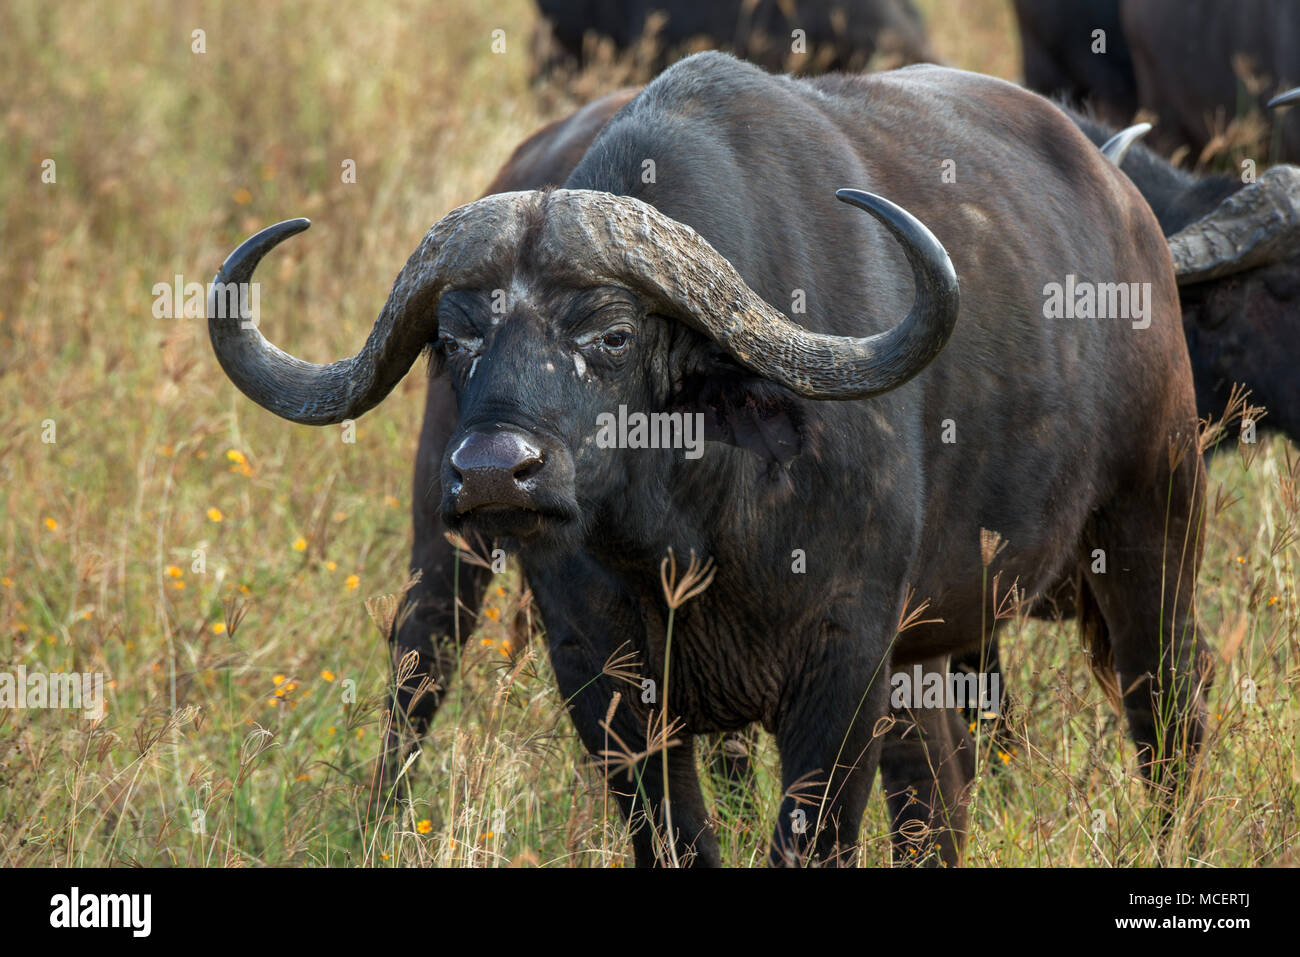 CLOSE UP OF AFRICAN BUFFLE (Syncerus caffer), Ngorongoro Conservation Area, TANZANIA Banque D'Images